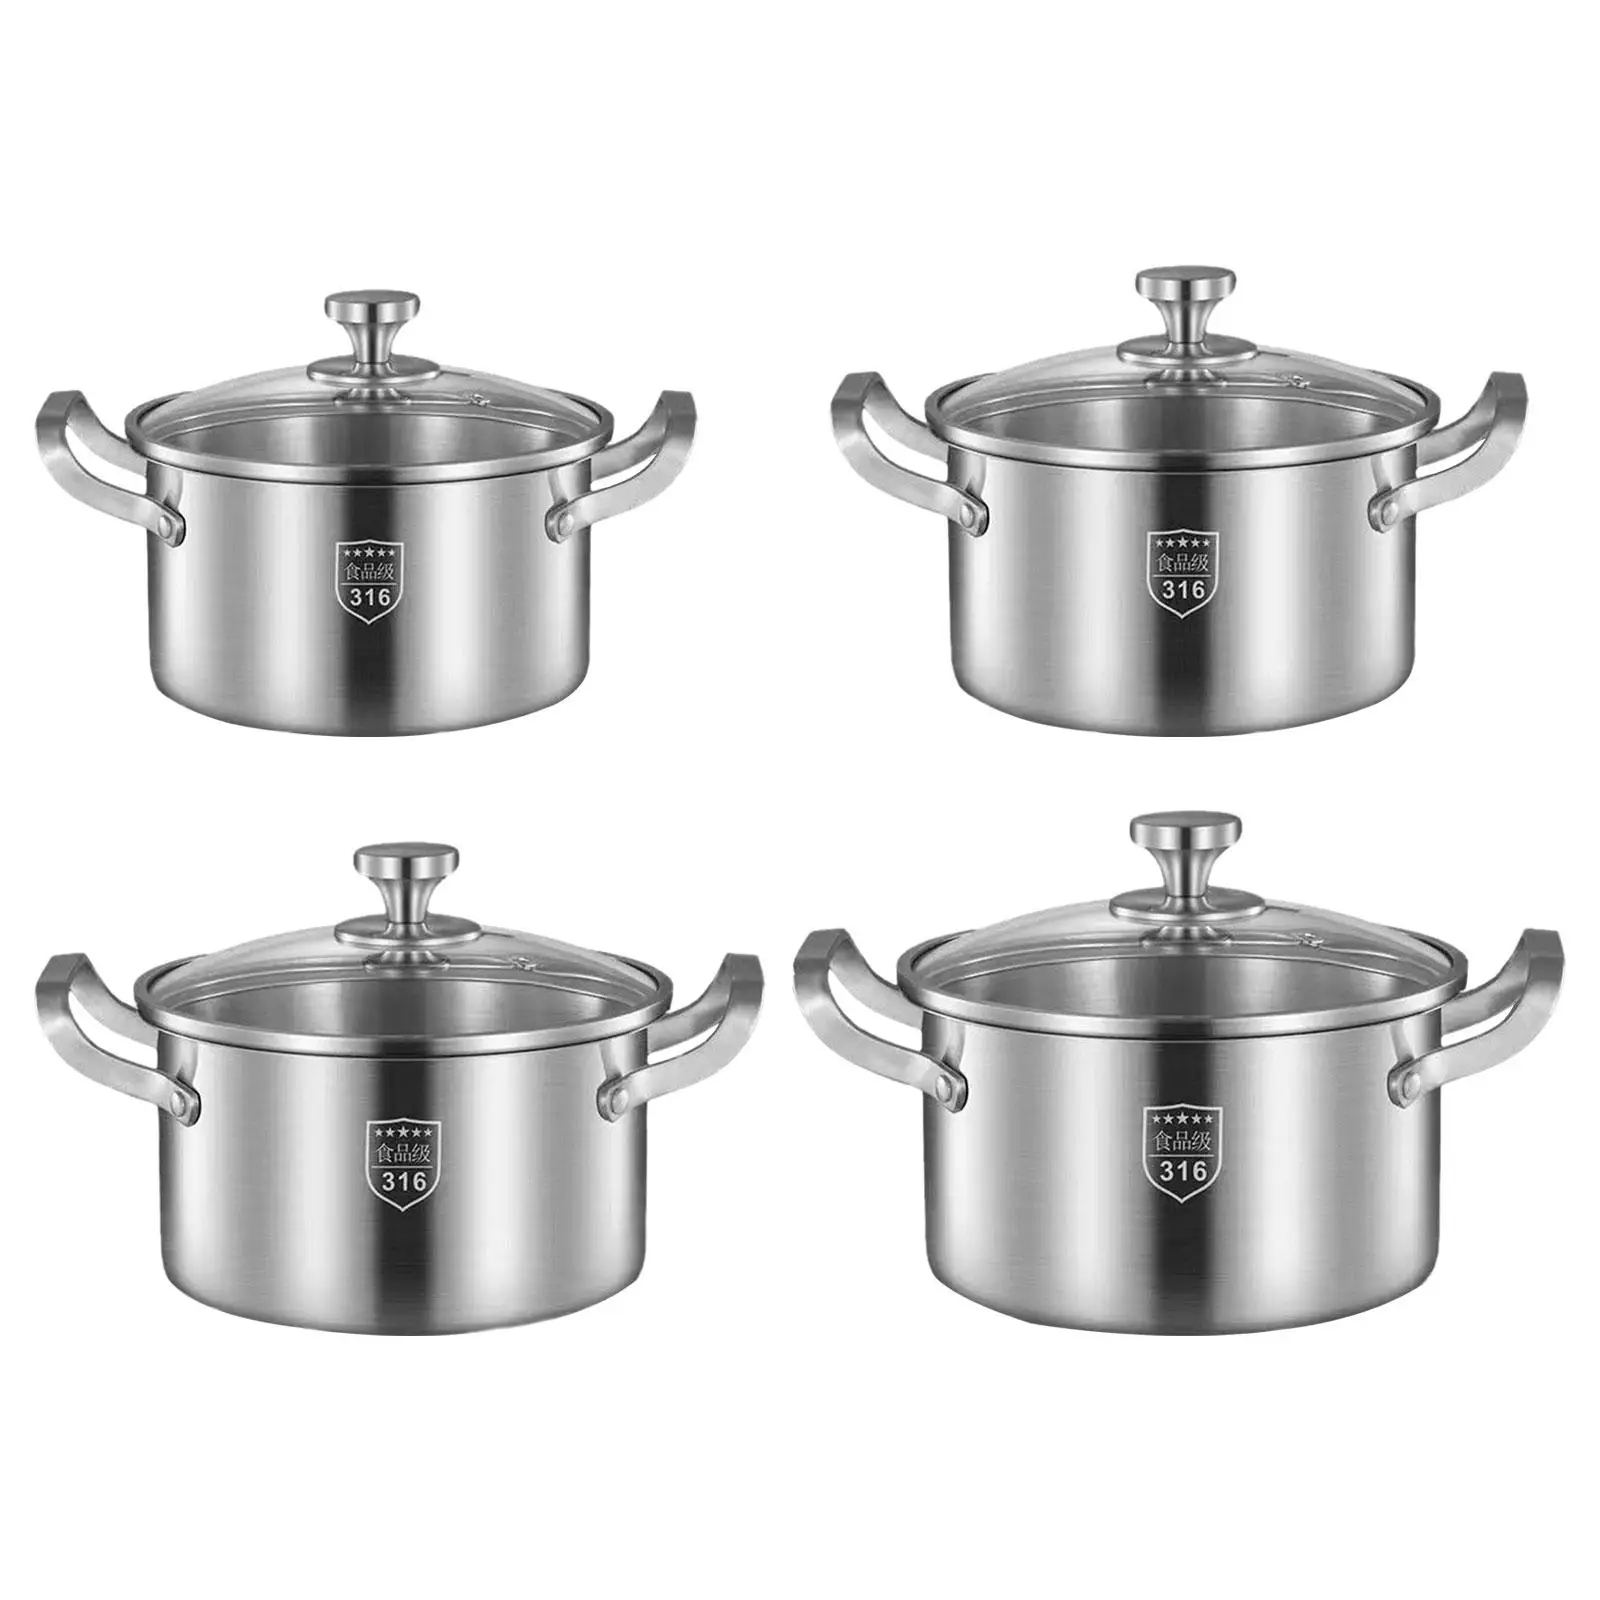 Soup Pot Works Saucepan Stockpot with Lid for Cafe Home Kitchen Countertop